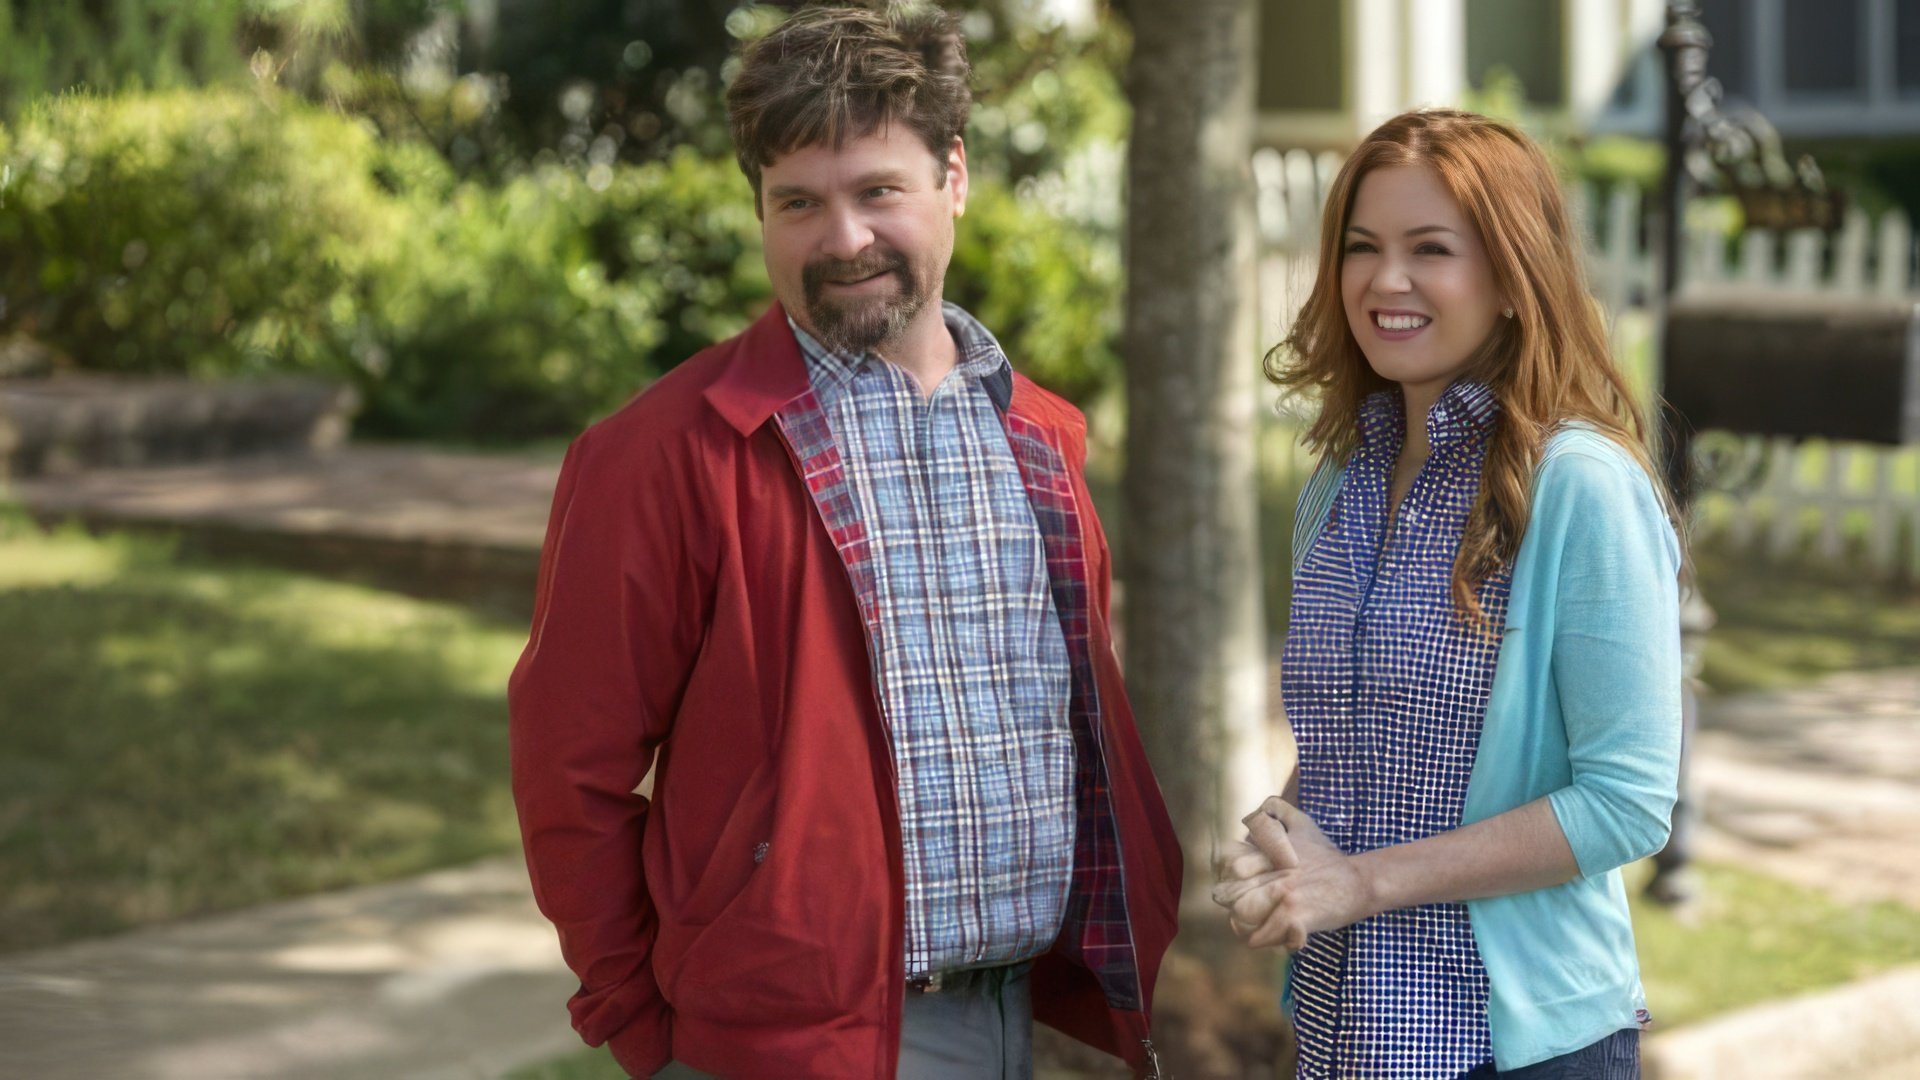 Zach Galifianakis and Isla Fisher in the movie Keeping Up with the Joneses